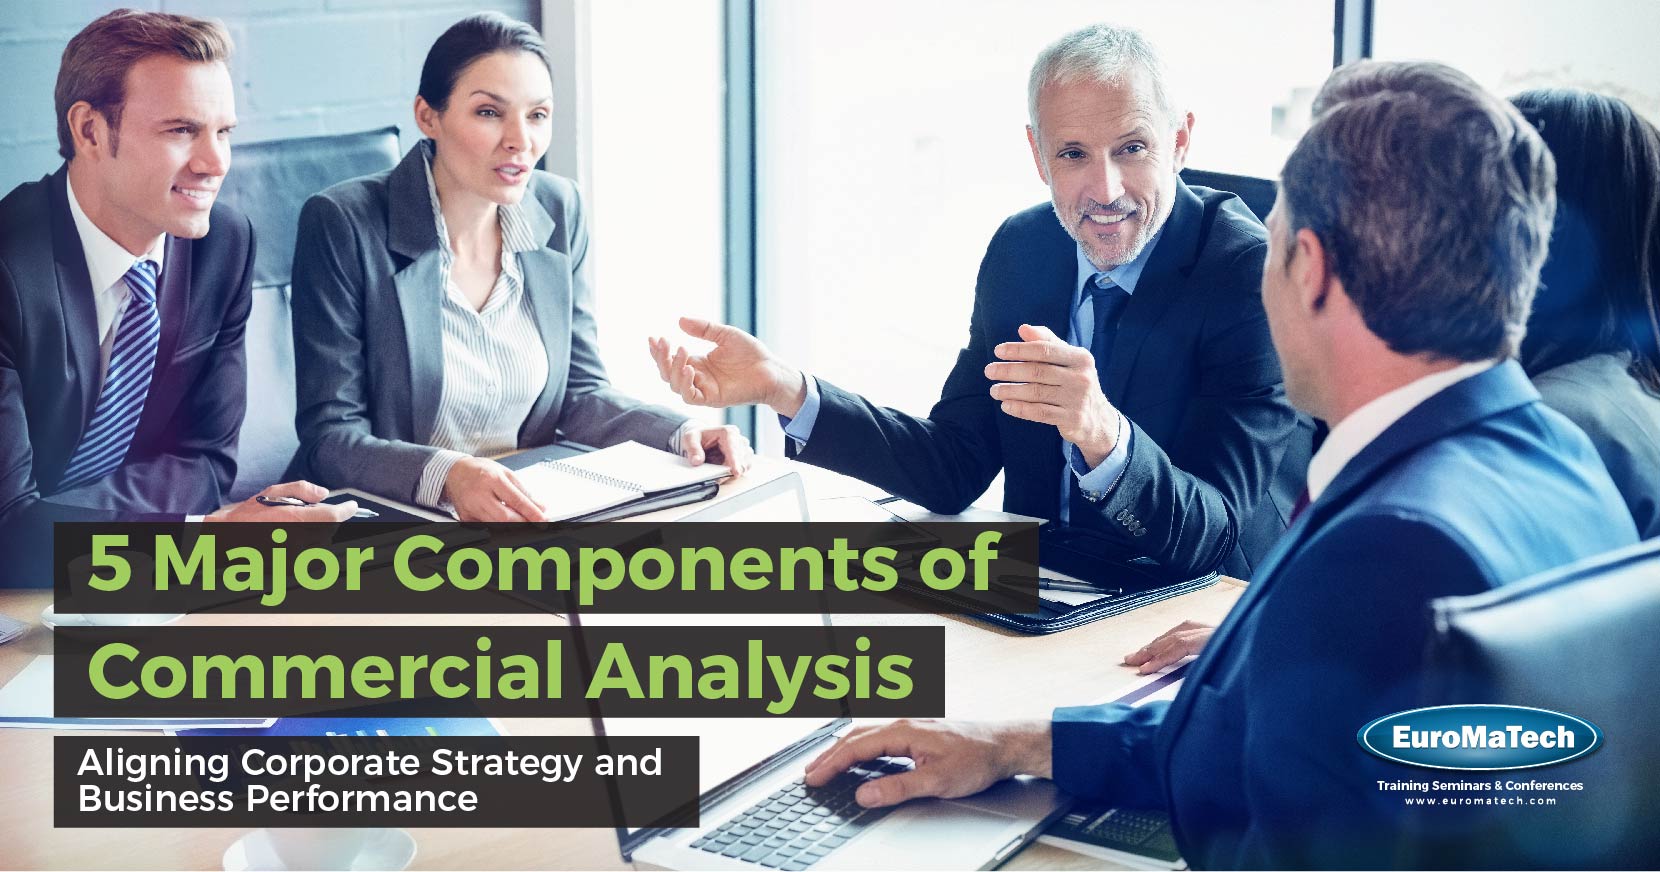 Advanced Commercial Analysis Training Course in Dubai